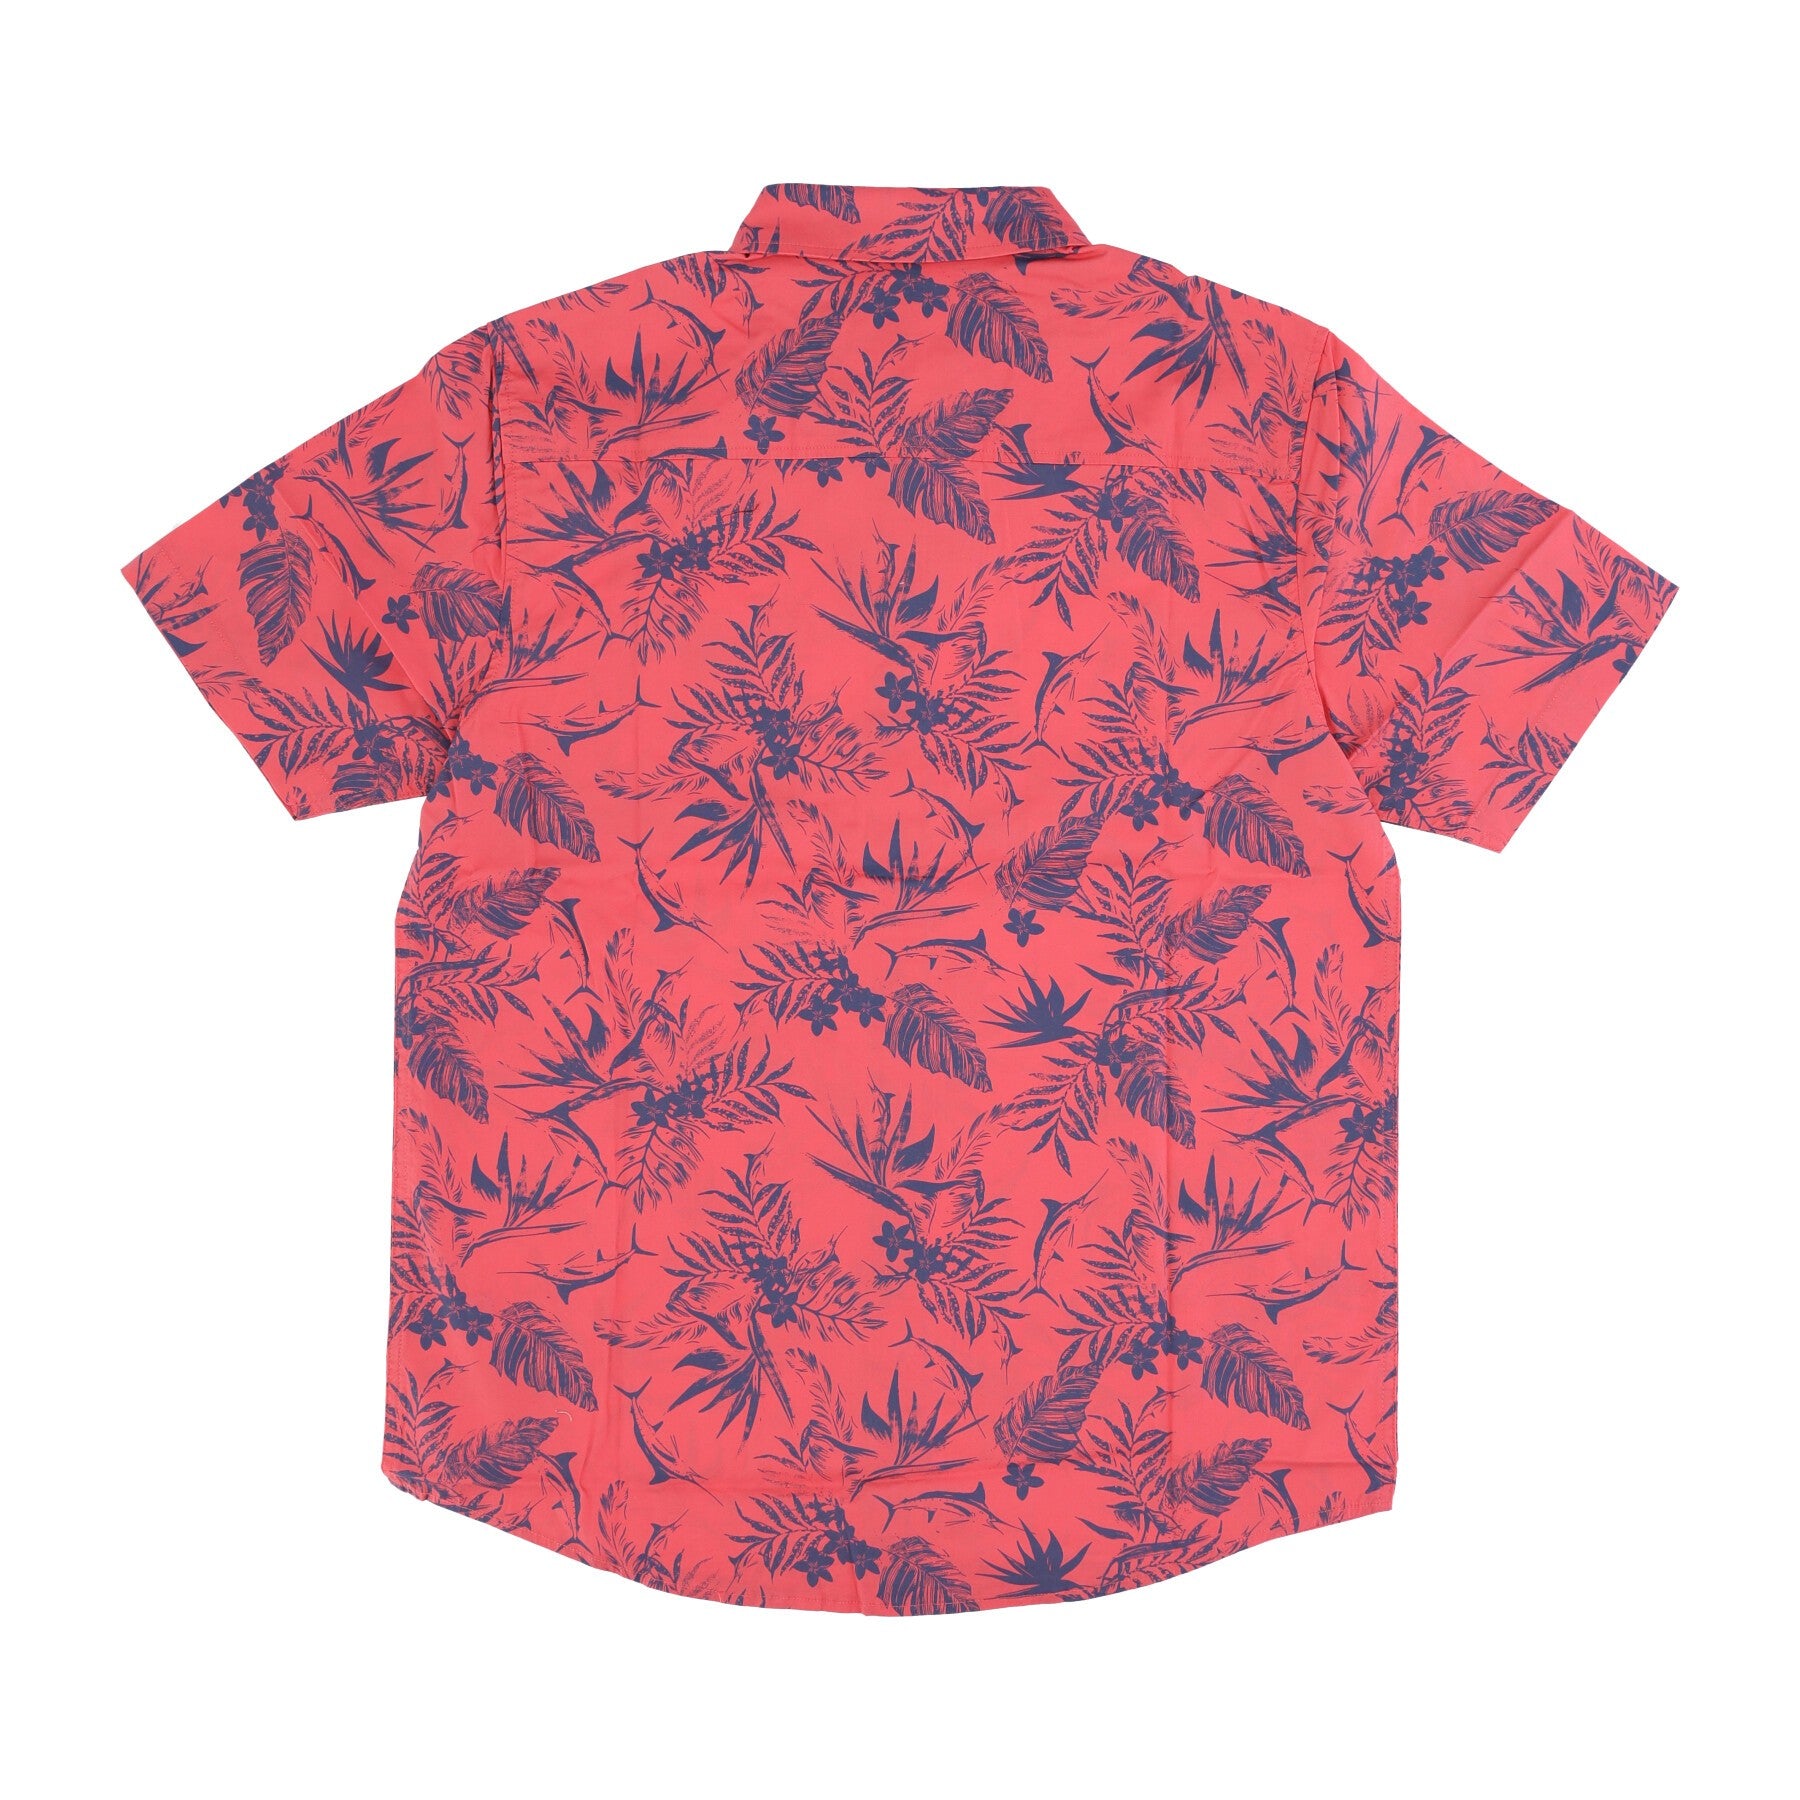 Lay Day Woven Men's Short Sleeve Shirt Coral